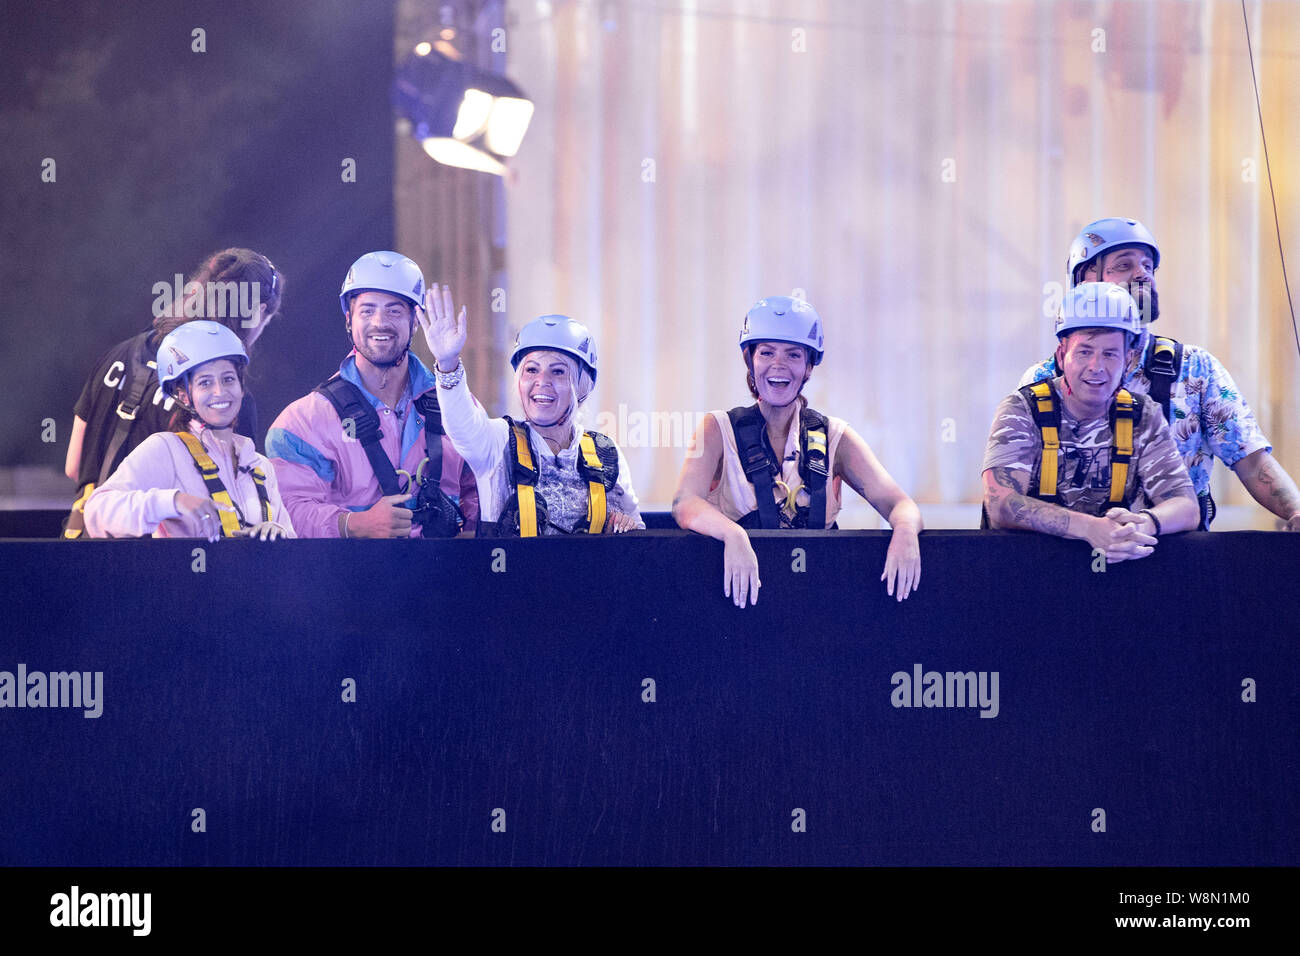 Cologne, Germany. 09th Aug, 2019. Eva Benetatou (l-r), Tobi Wegener, Ginger Costello Wollersheim, Janine Pink, Almklausi and Chris are on stage on a lift truck at the opening show of the new season of the Sat.1 reality show 'Promi Big Brother'. Credit: Marcel Kusch/dpa/Alamy Live News Stock Photo